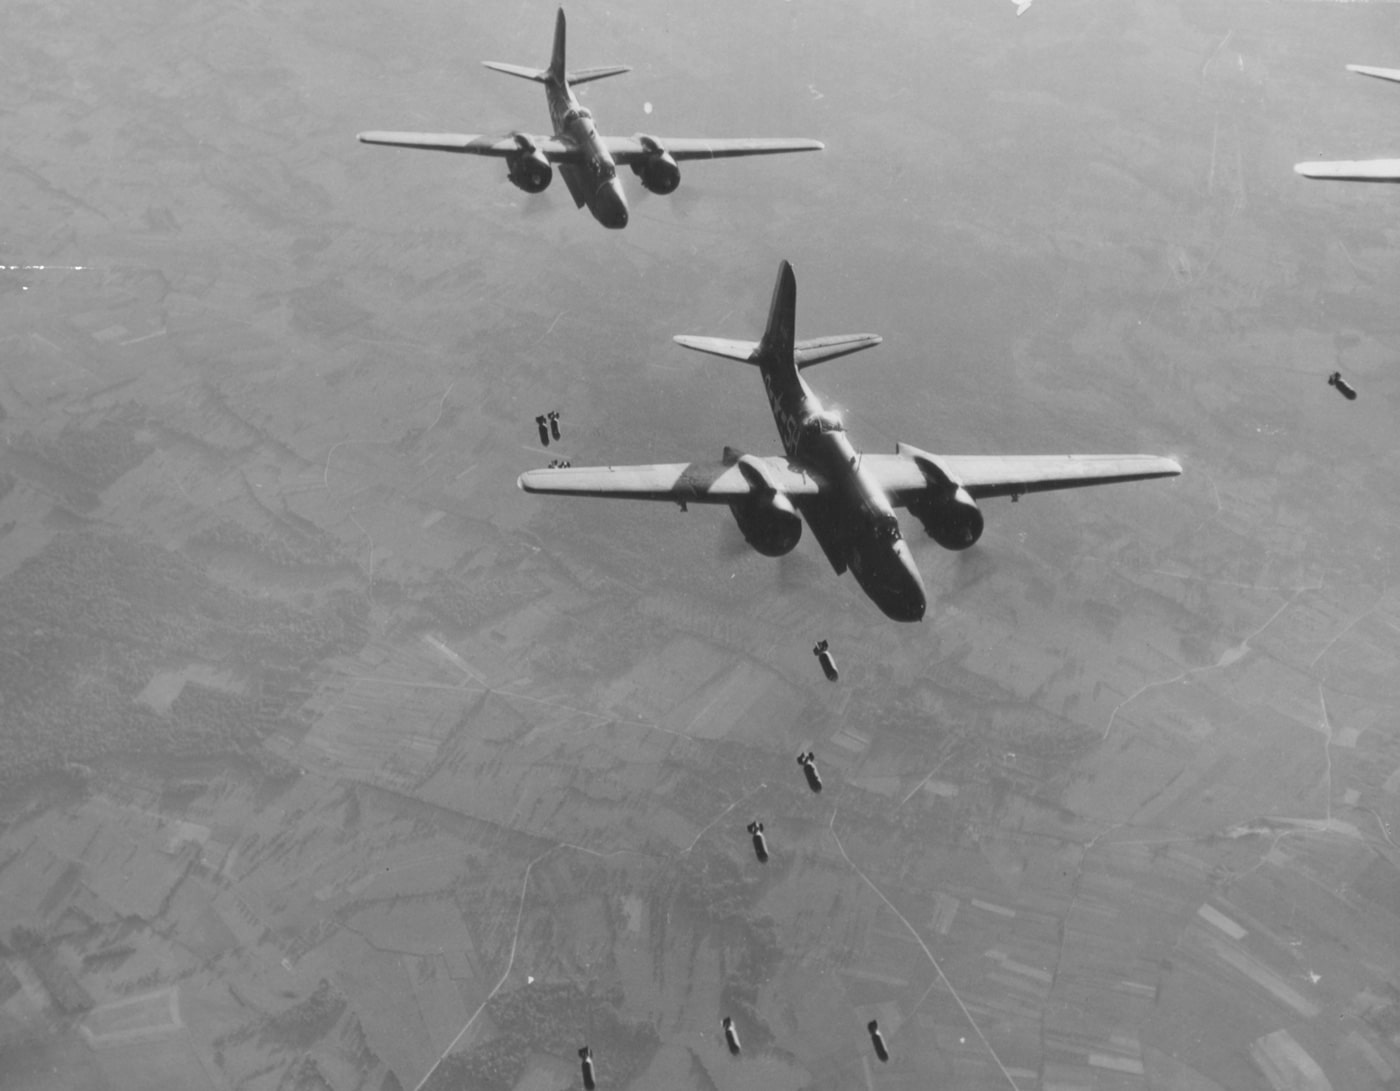 The images shows a squadron of A-20 Havocs bombing V-1 launch site in northern France.